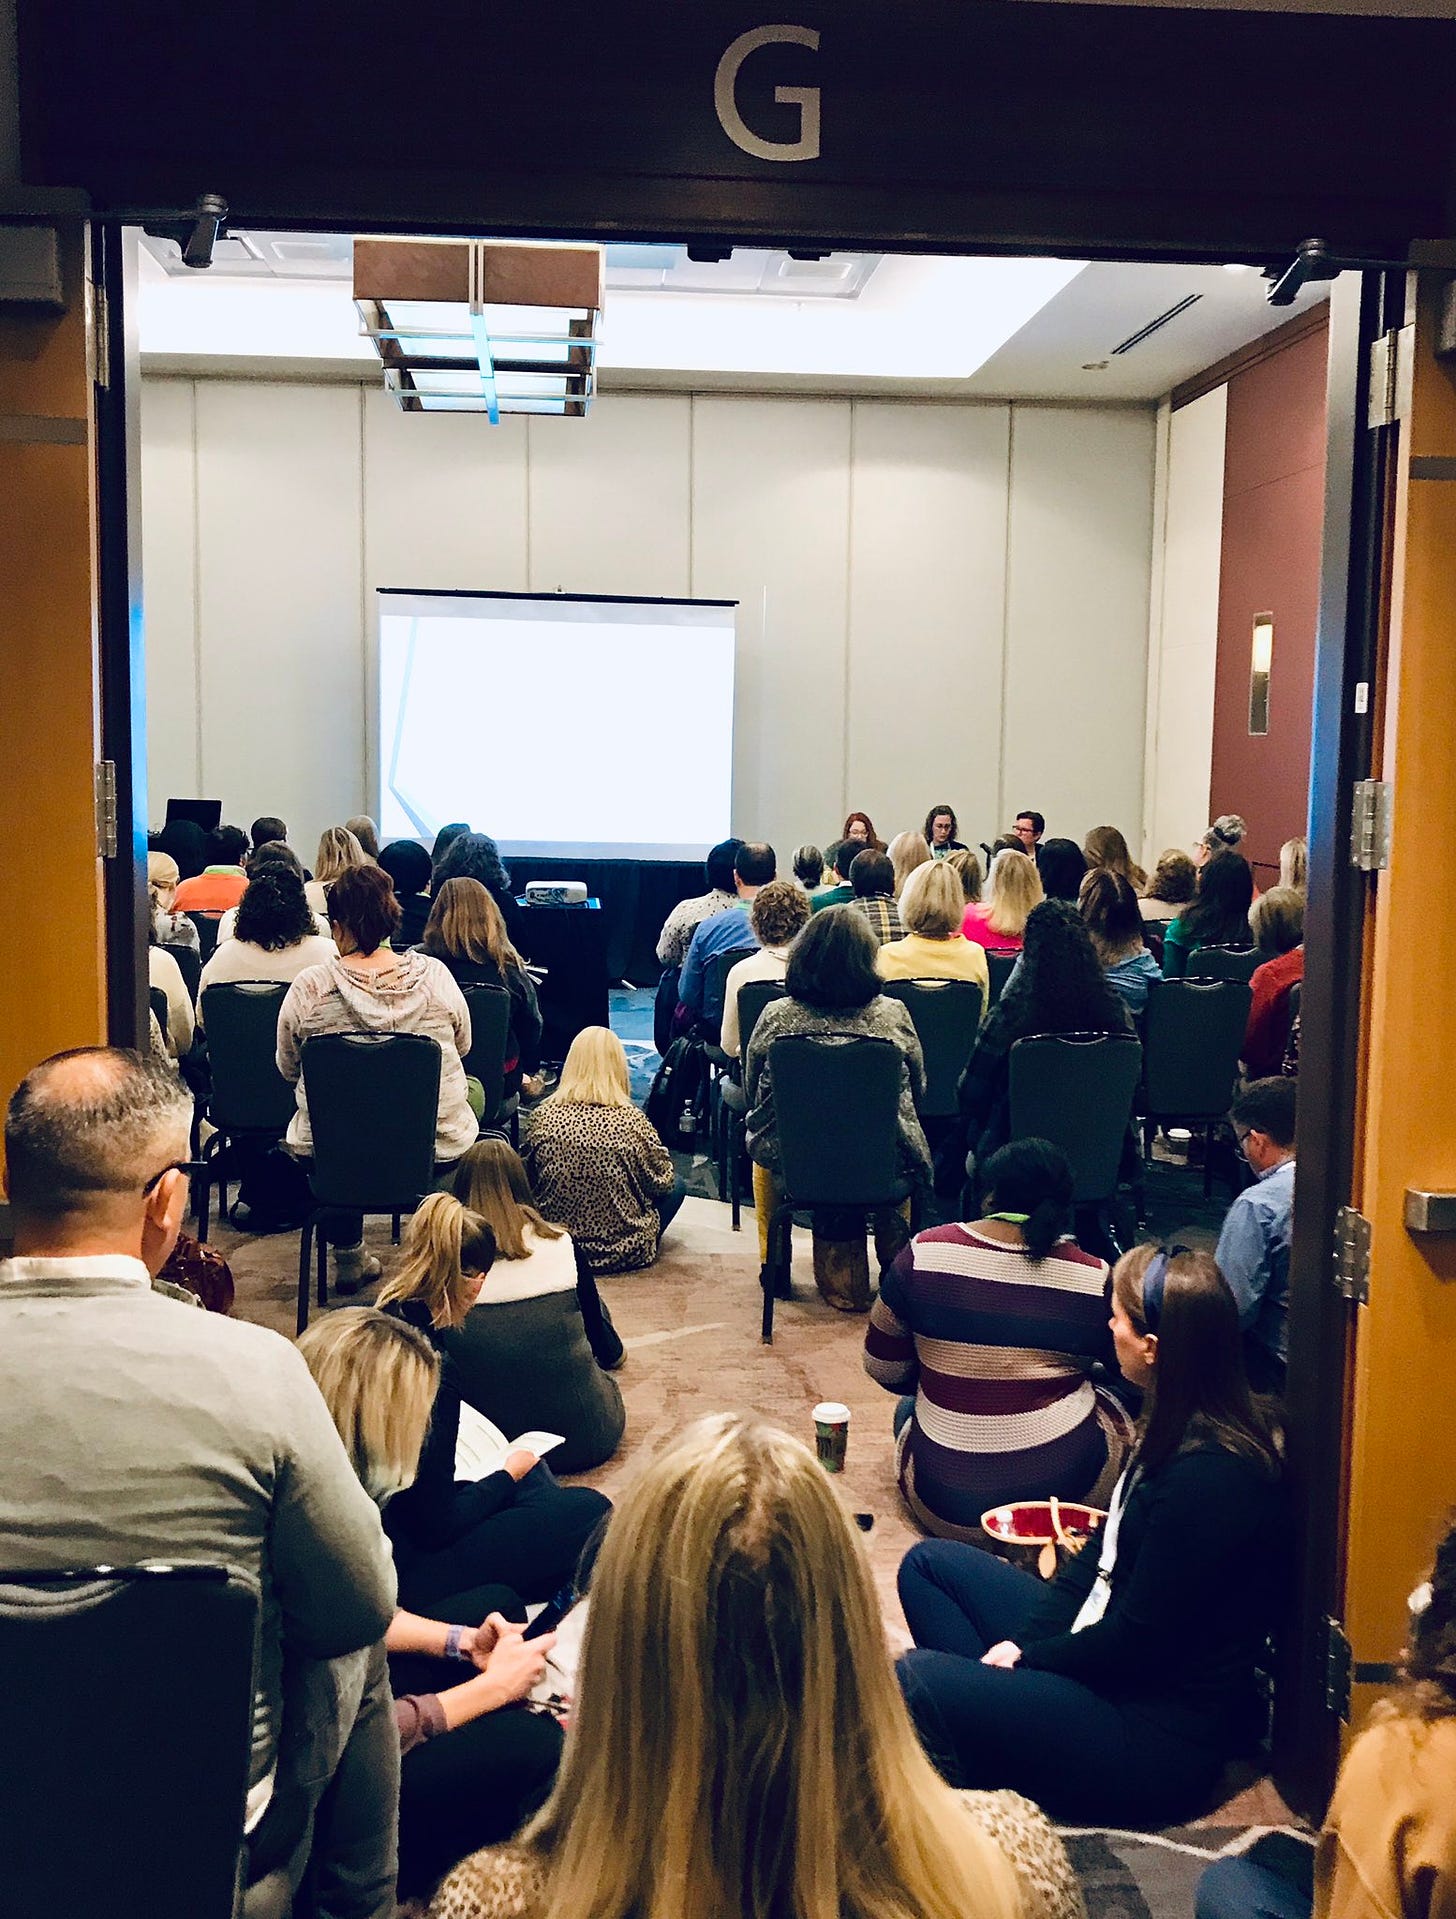 Image description: Our panel session at NAGC 2022 was packed and the audience spilled out into the hallway.